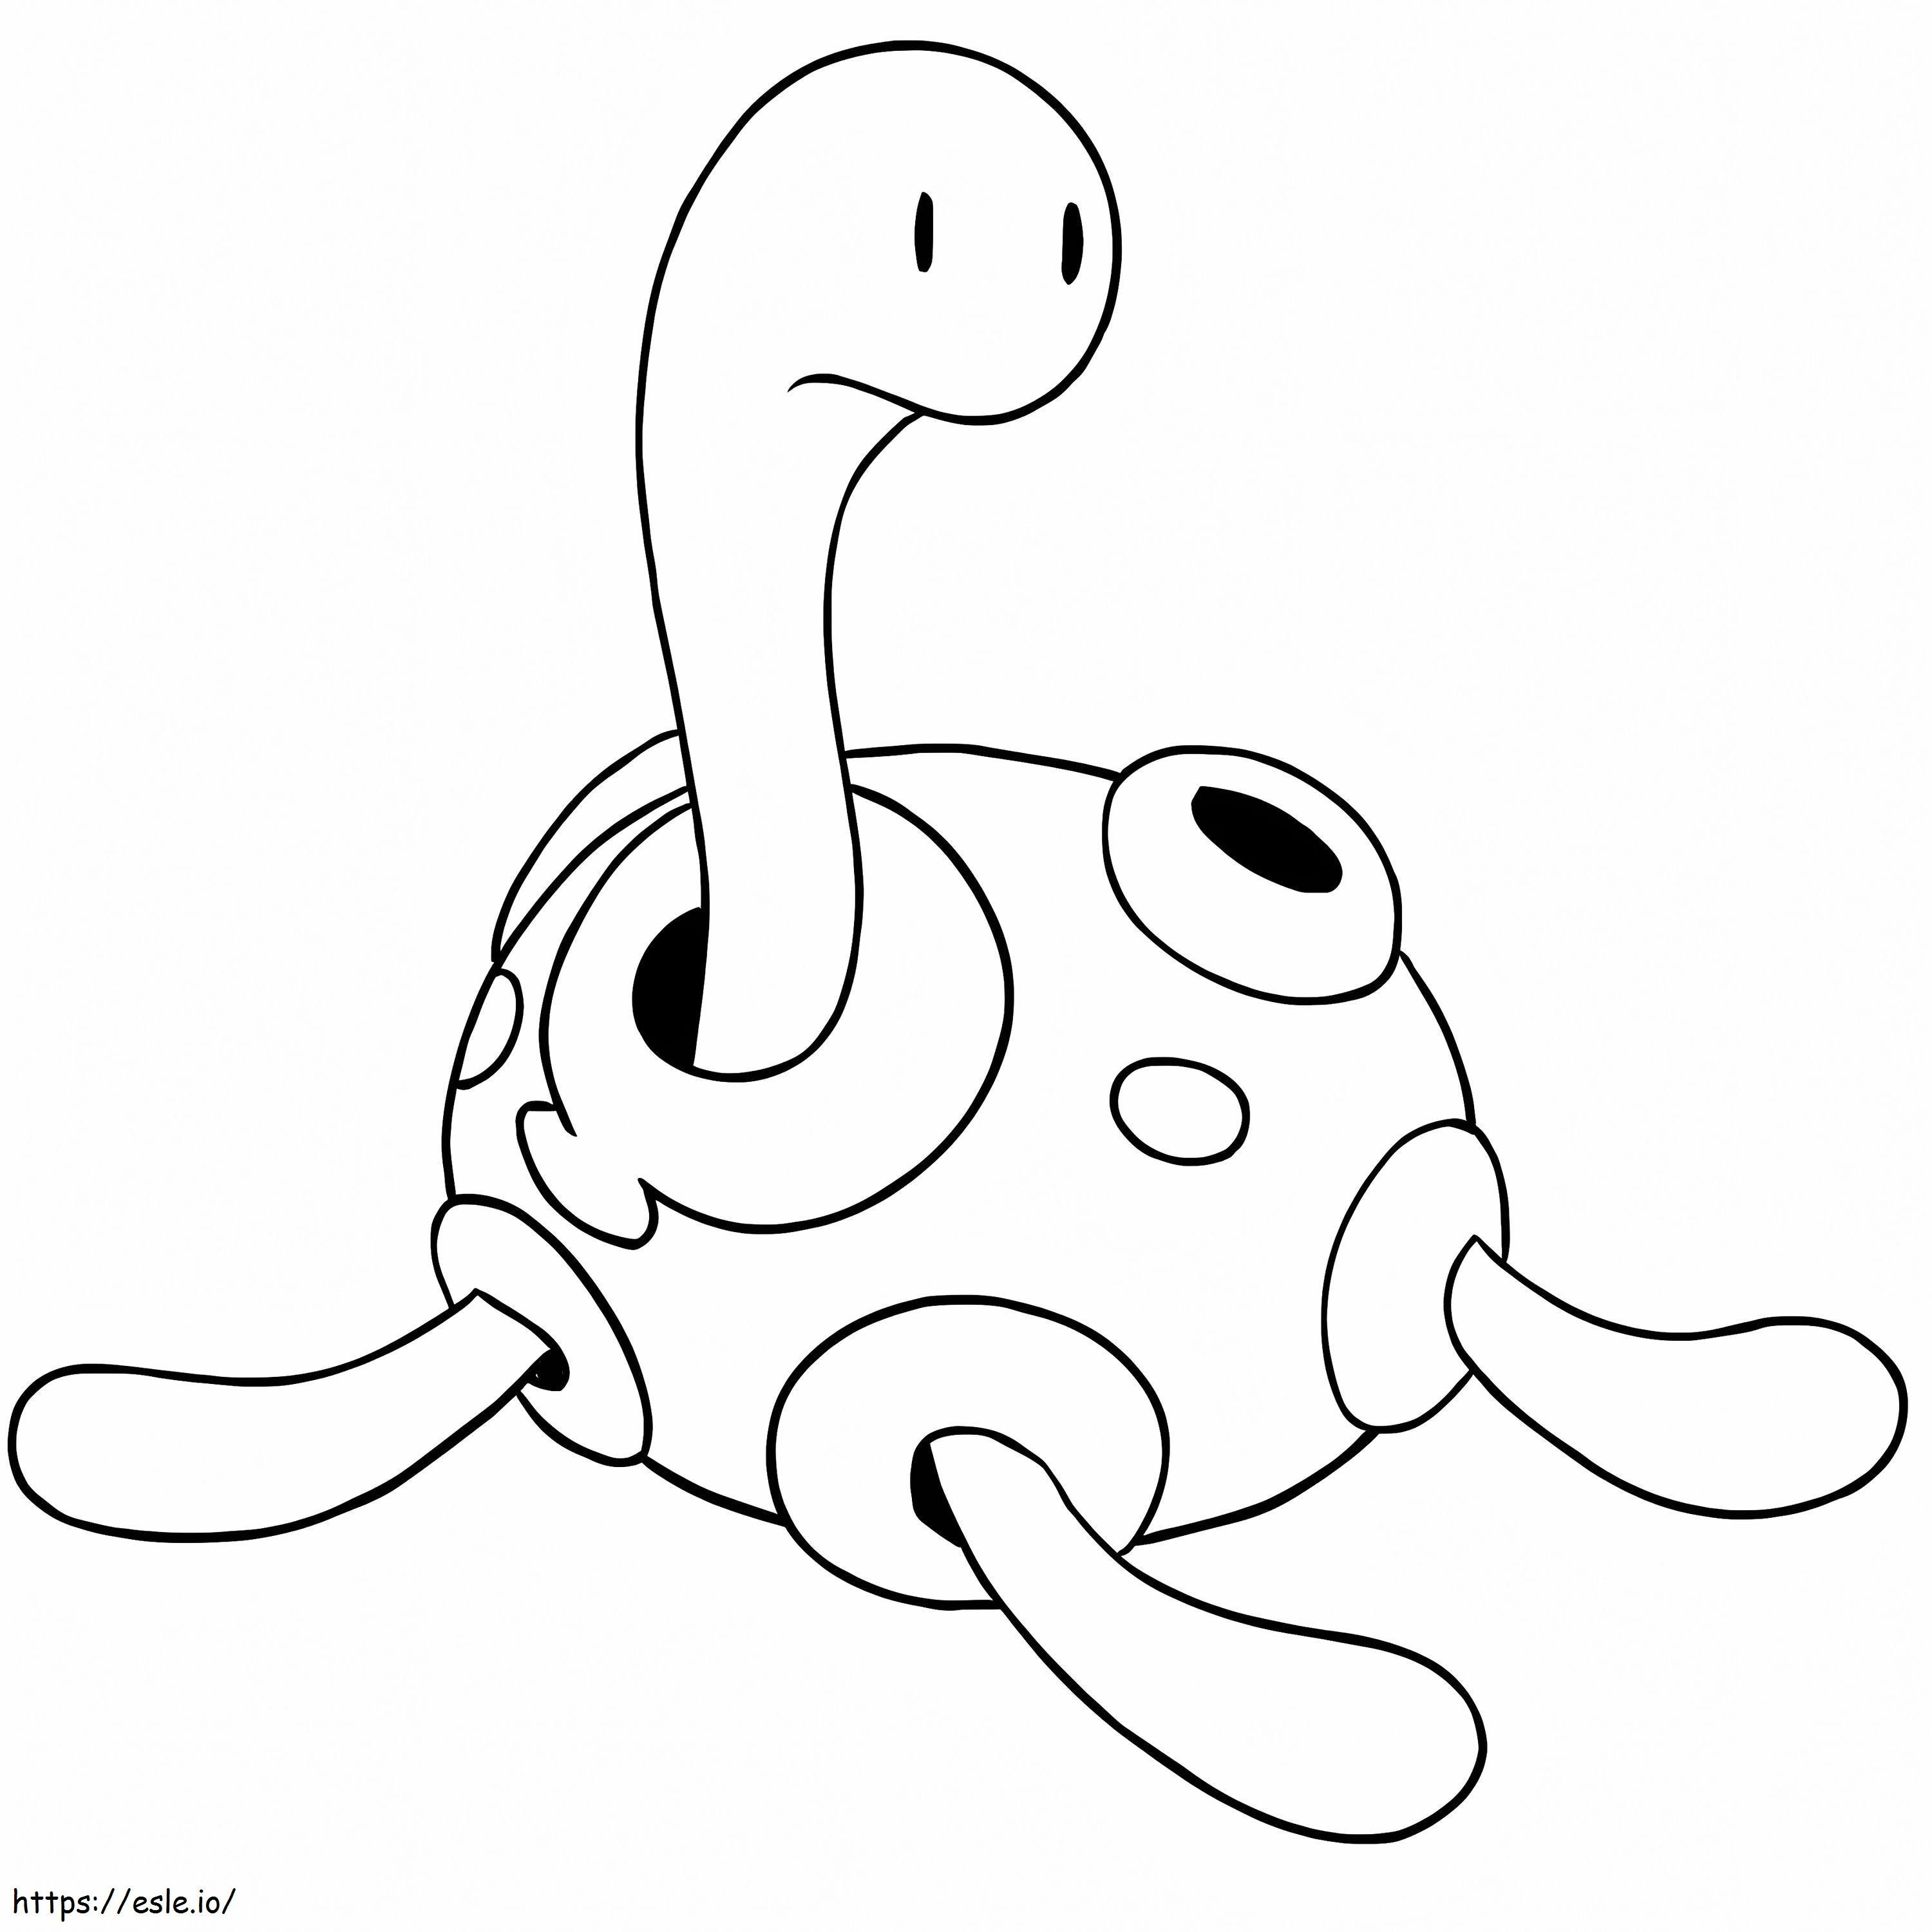 Printable Shuckle coloring page